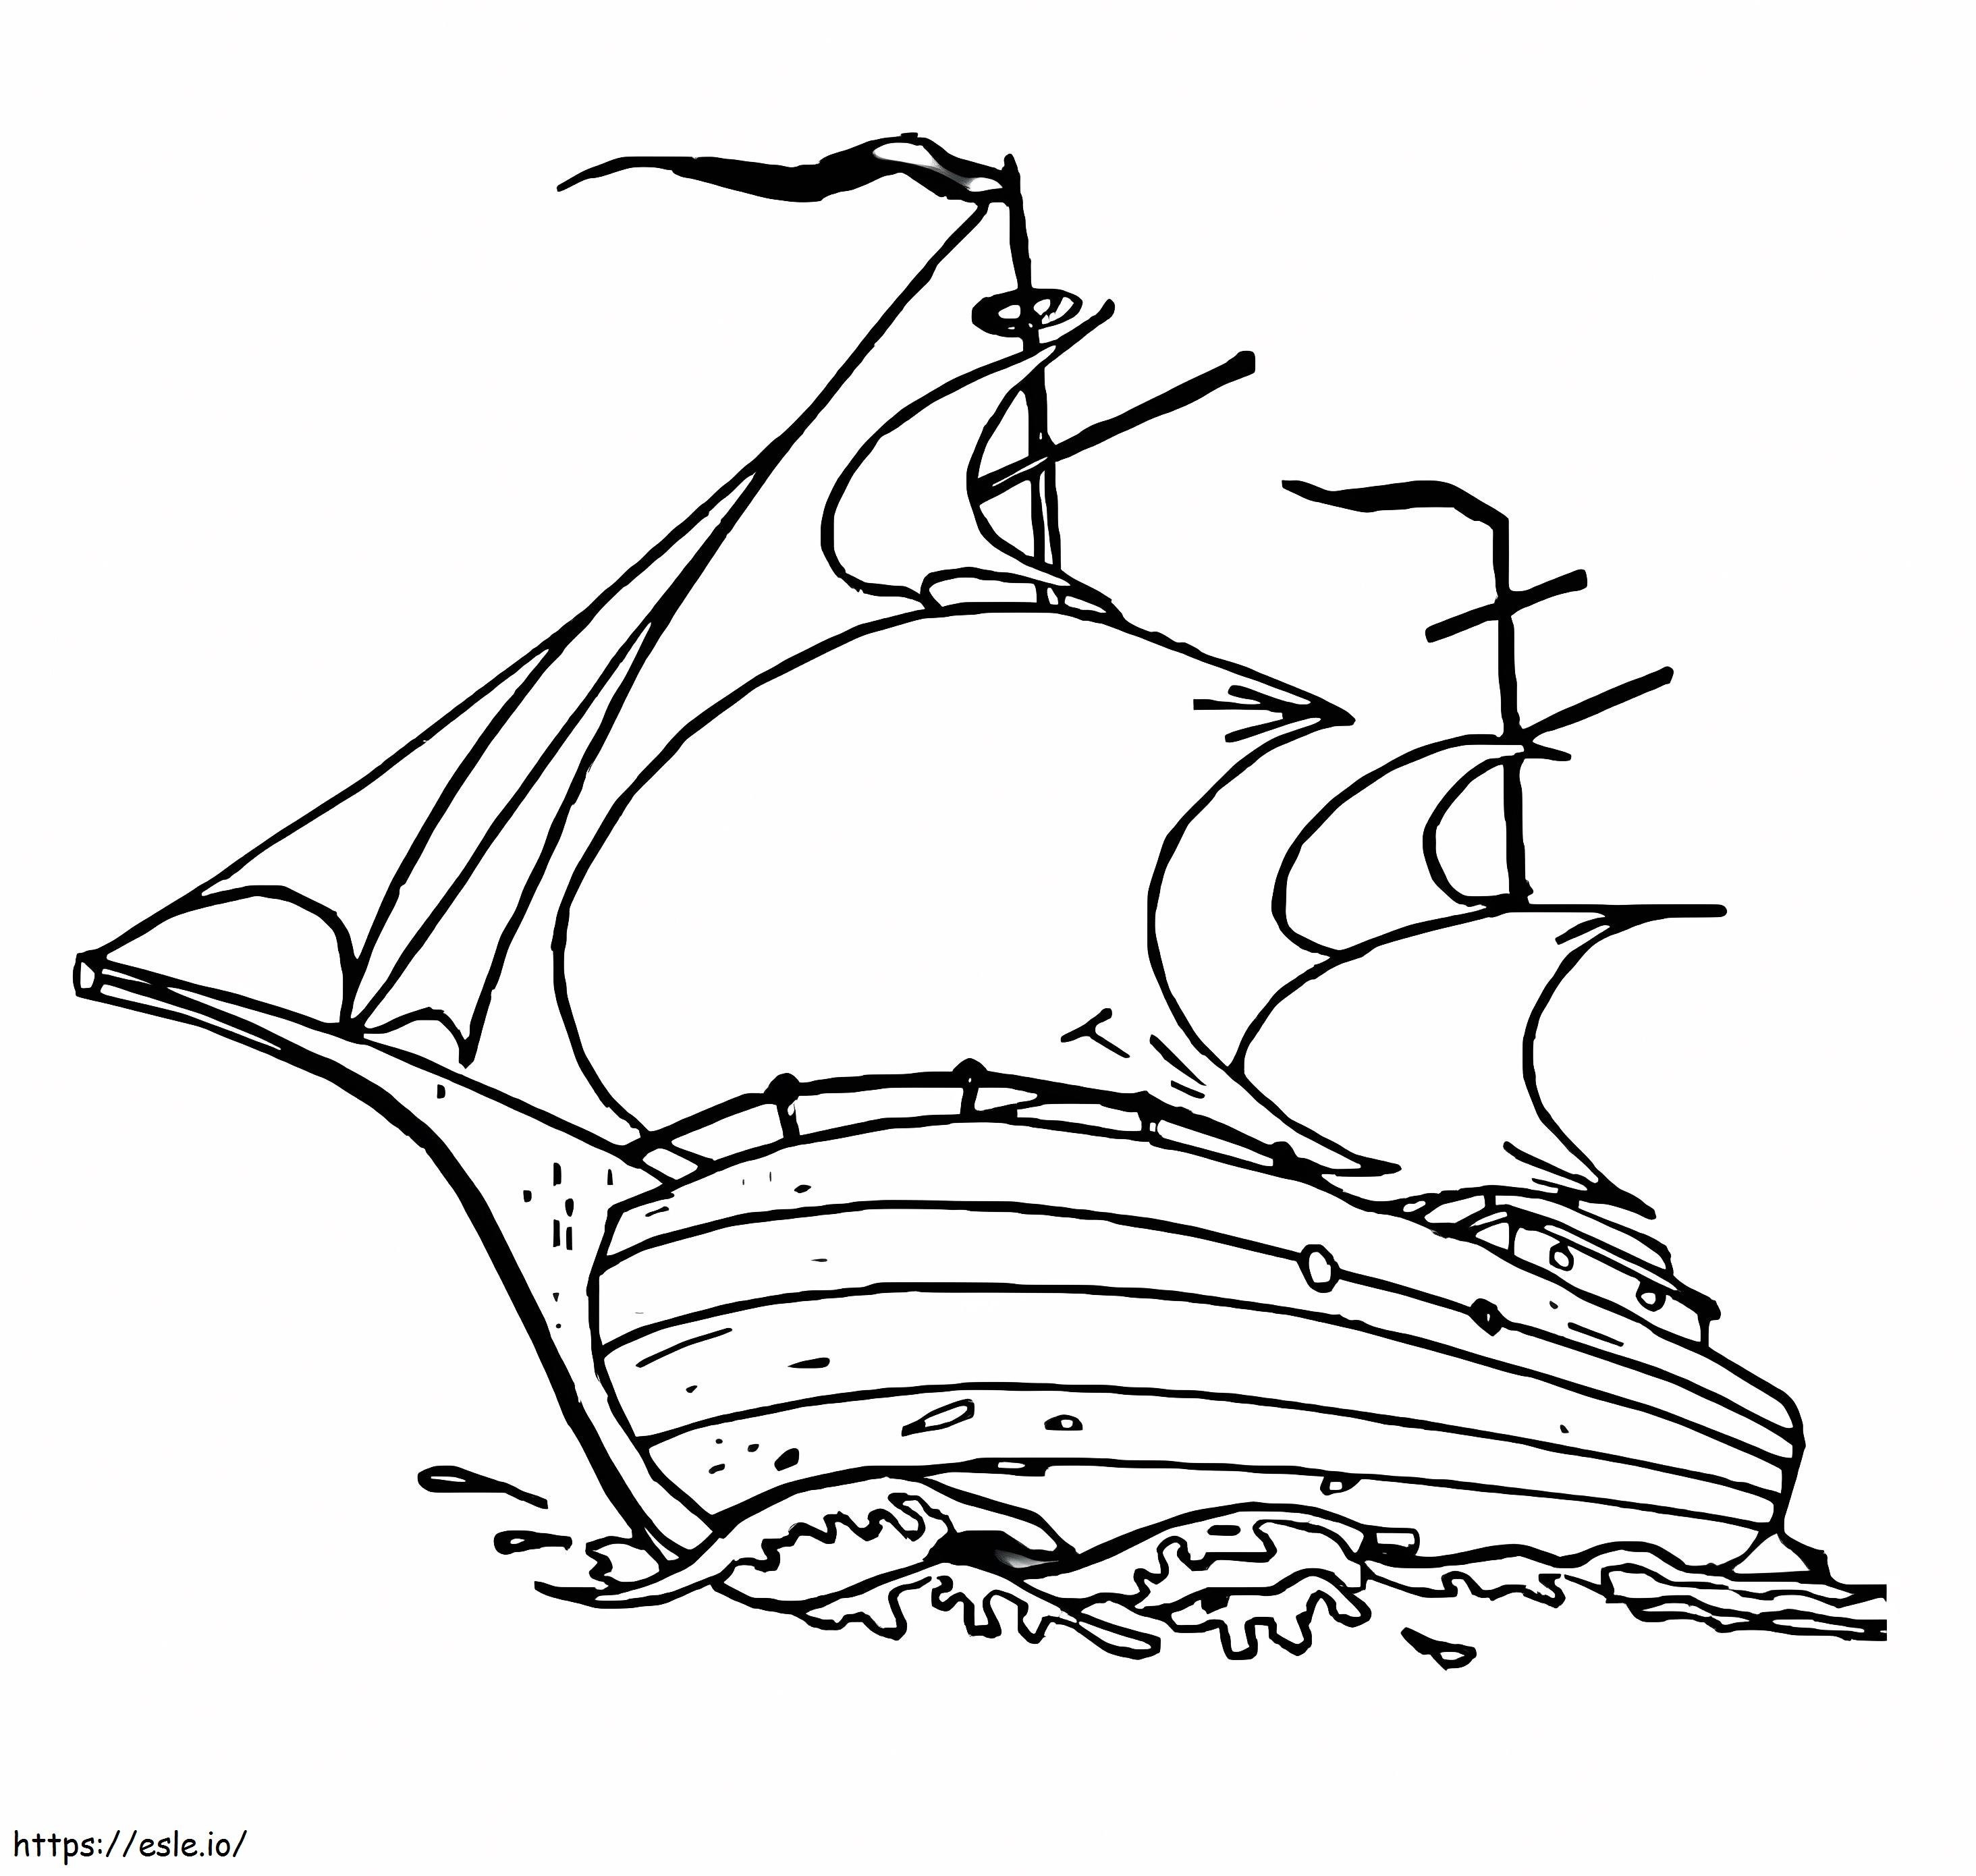 The Mayflower 3 coloring page